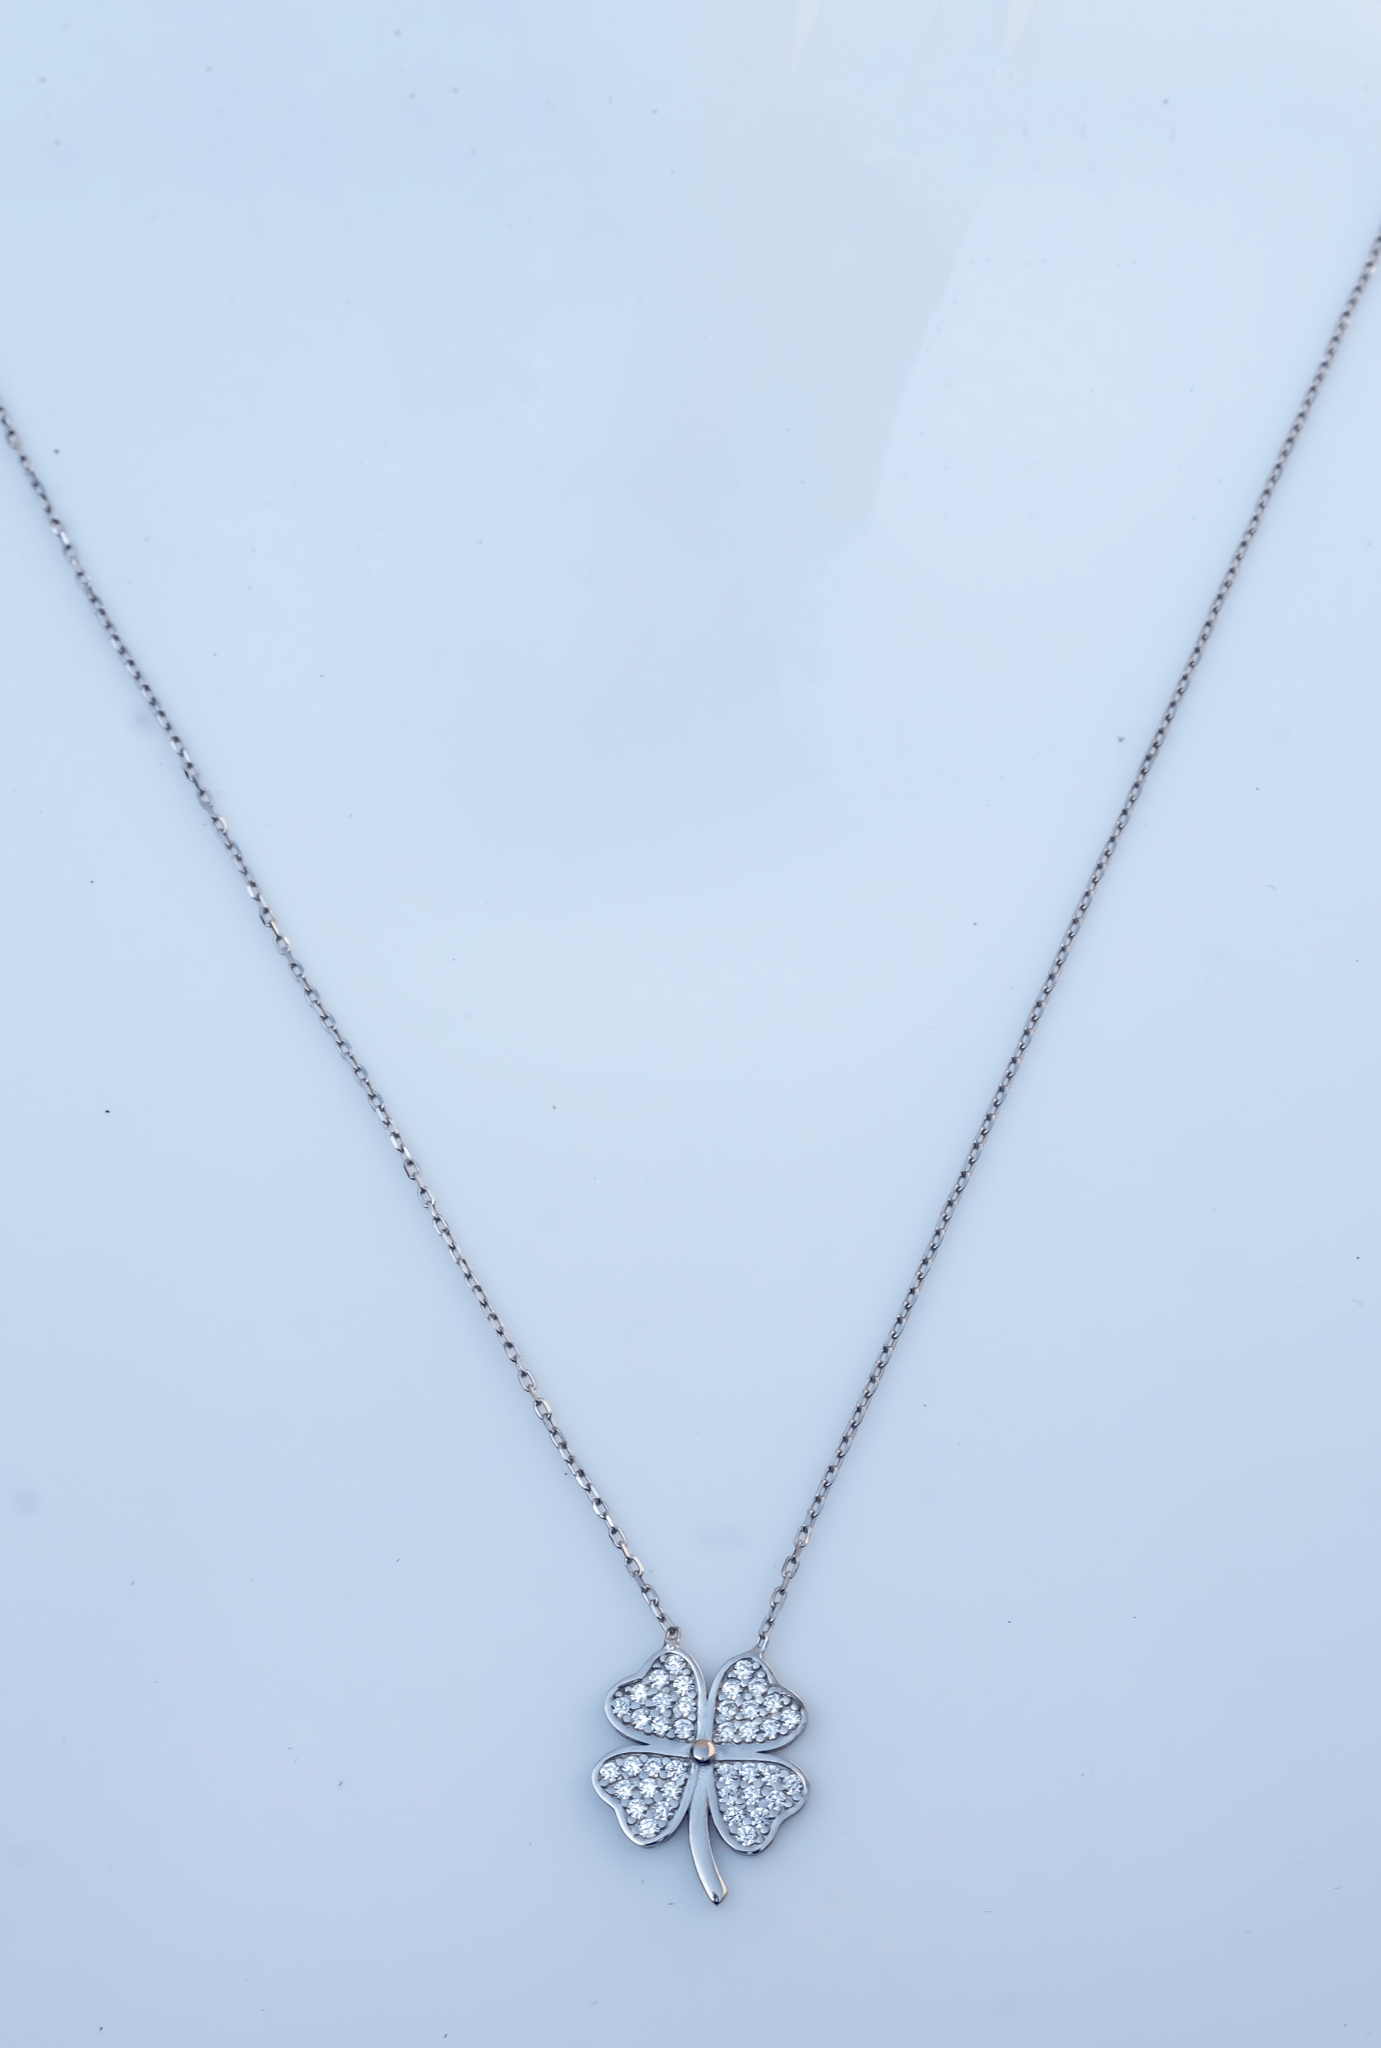 Silver Flower Necklace.